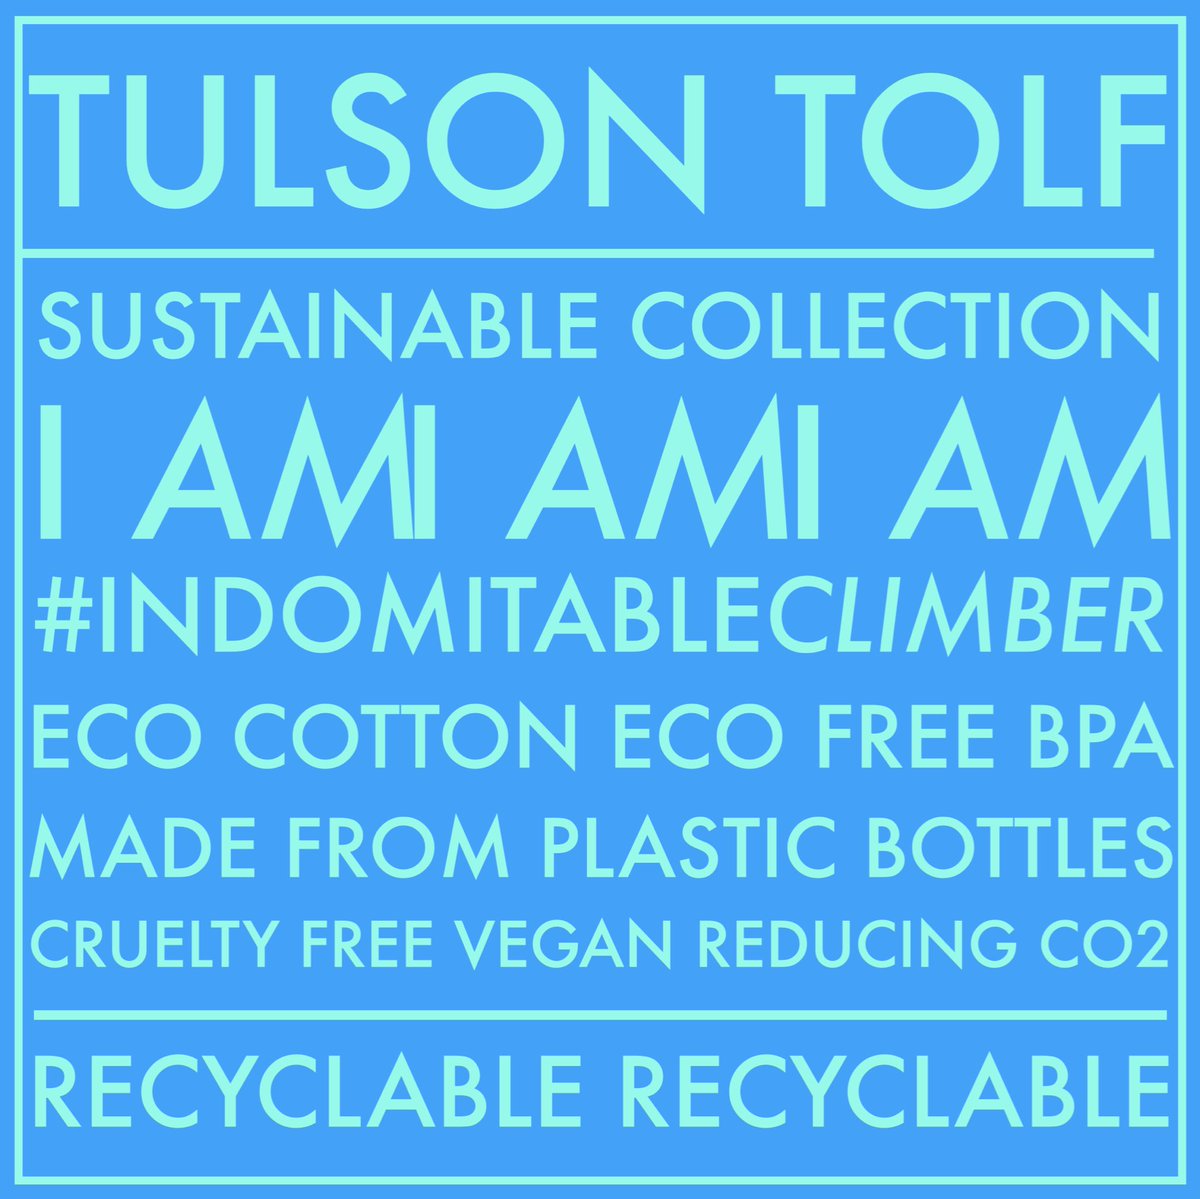 Enjoy your fresh drinks in the new Reusable Bottle free of BPA 💧🎧 #indomitableclimber #tulsontolf #sustainabily